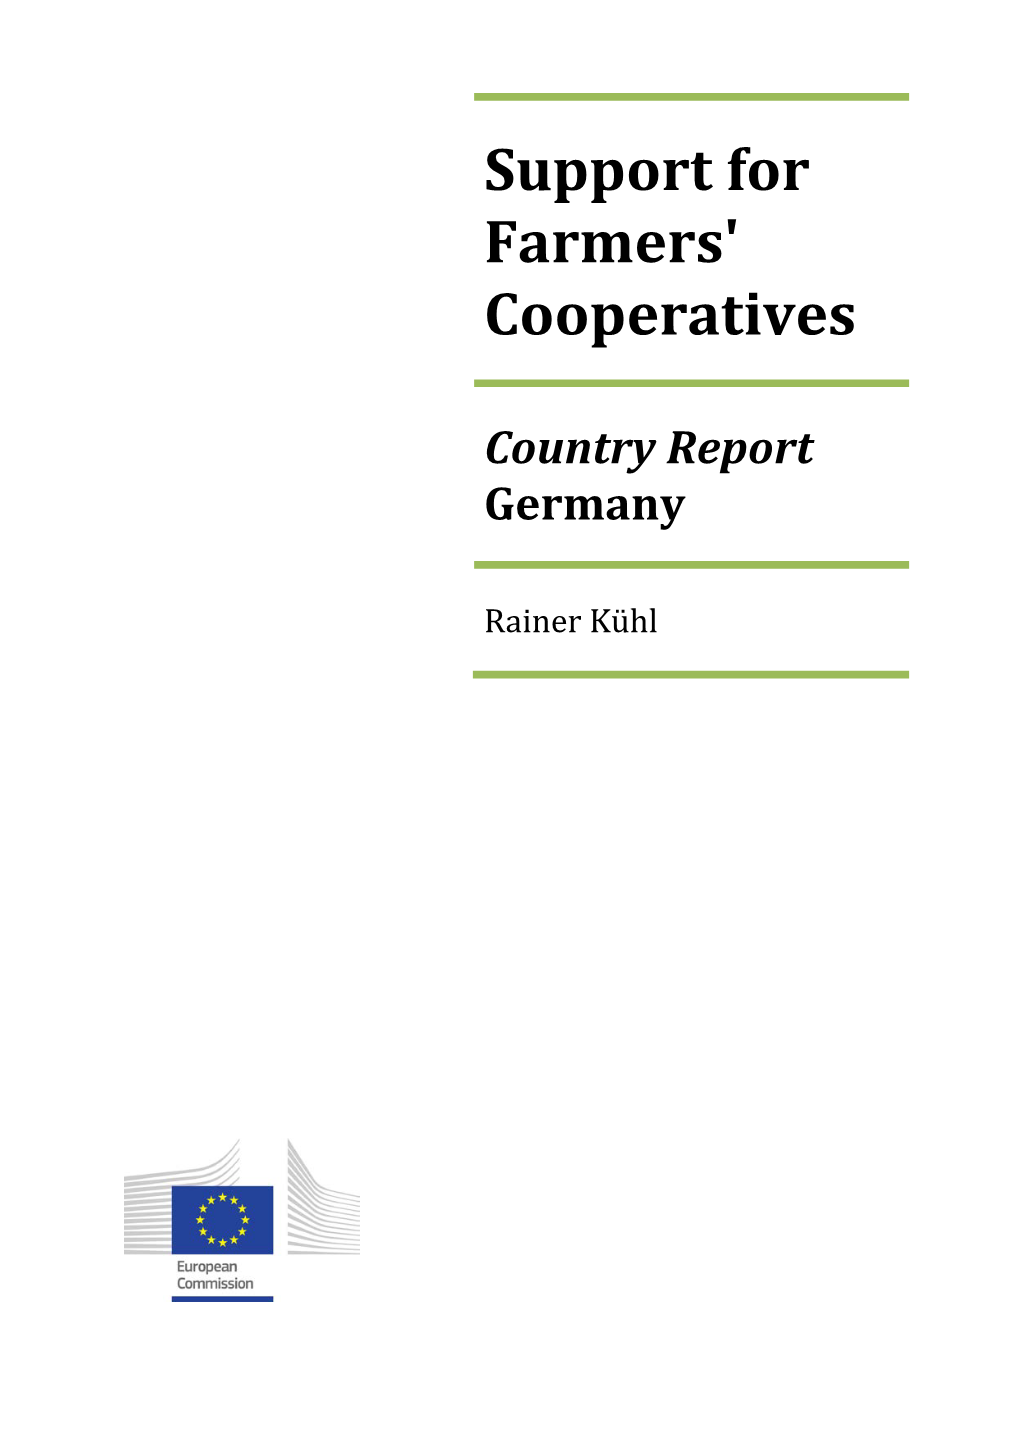 Support for Farmers' Cooperatives Country Report Germany